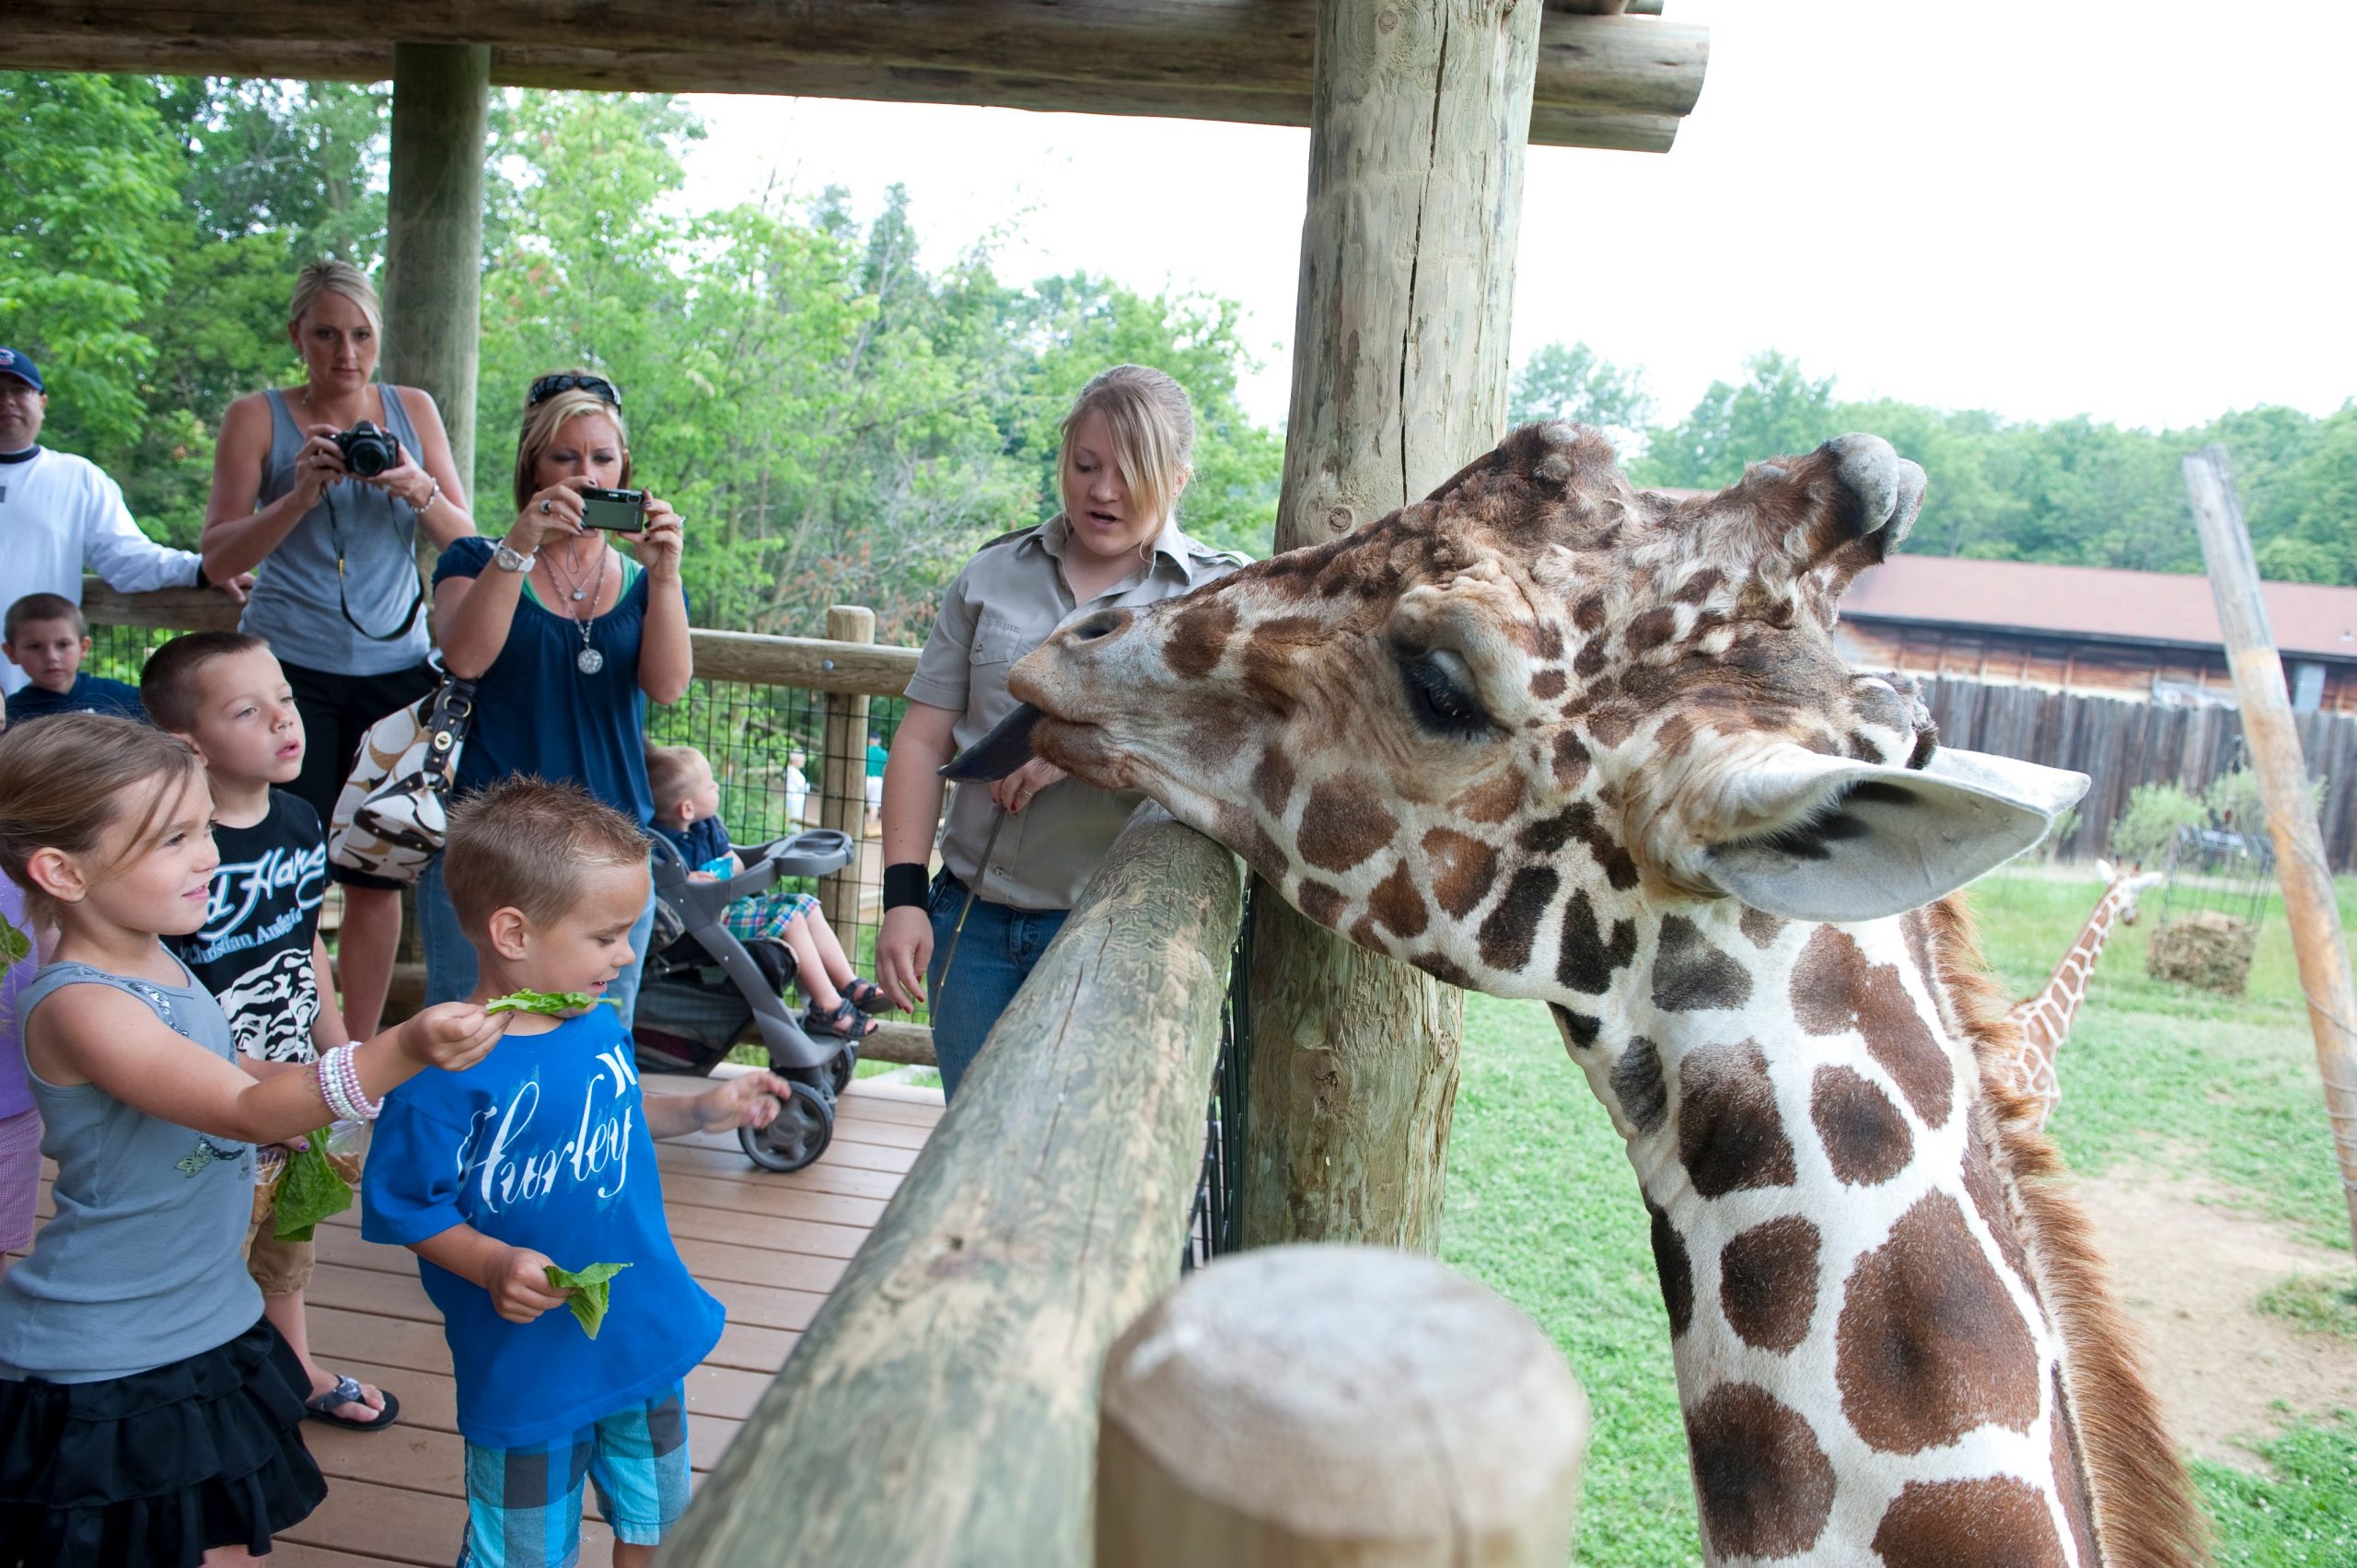 The Fort Wayne Children’s Zoo is a must-do for families visiting Fort Wayne. (Photo credit: Fort Wayne Children’s Zoo)